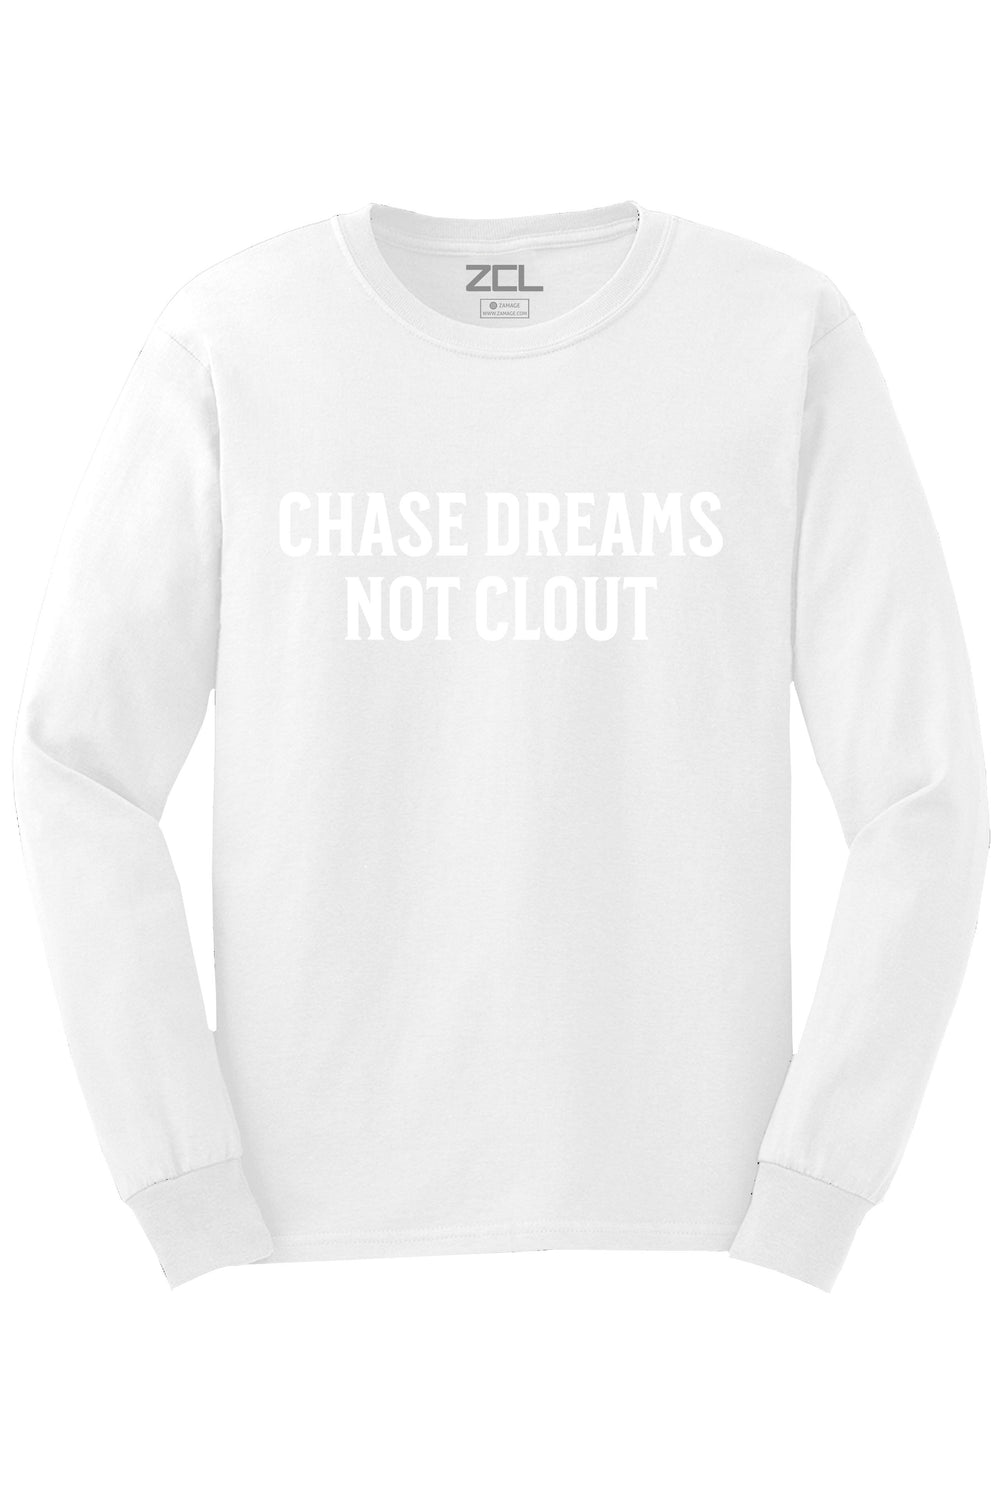 Chase Dreams Not Clout Long Sleeve Tee (White Logo) - Zamage